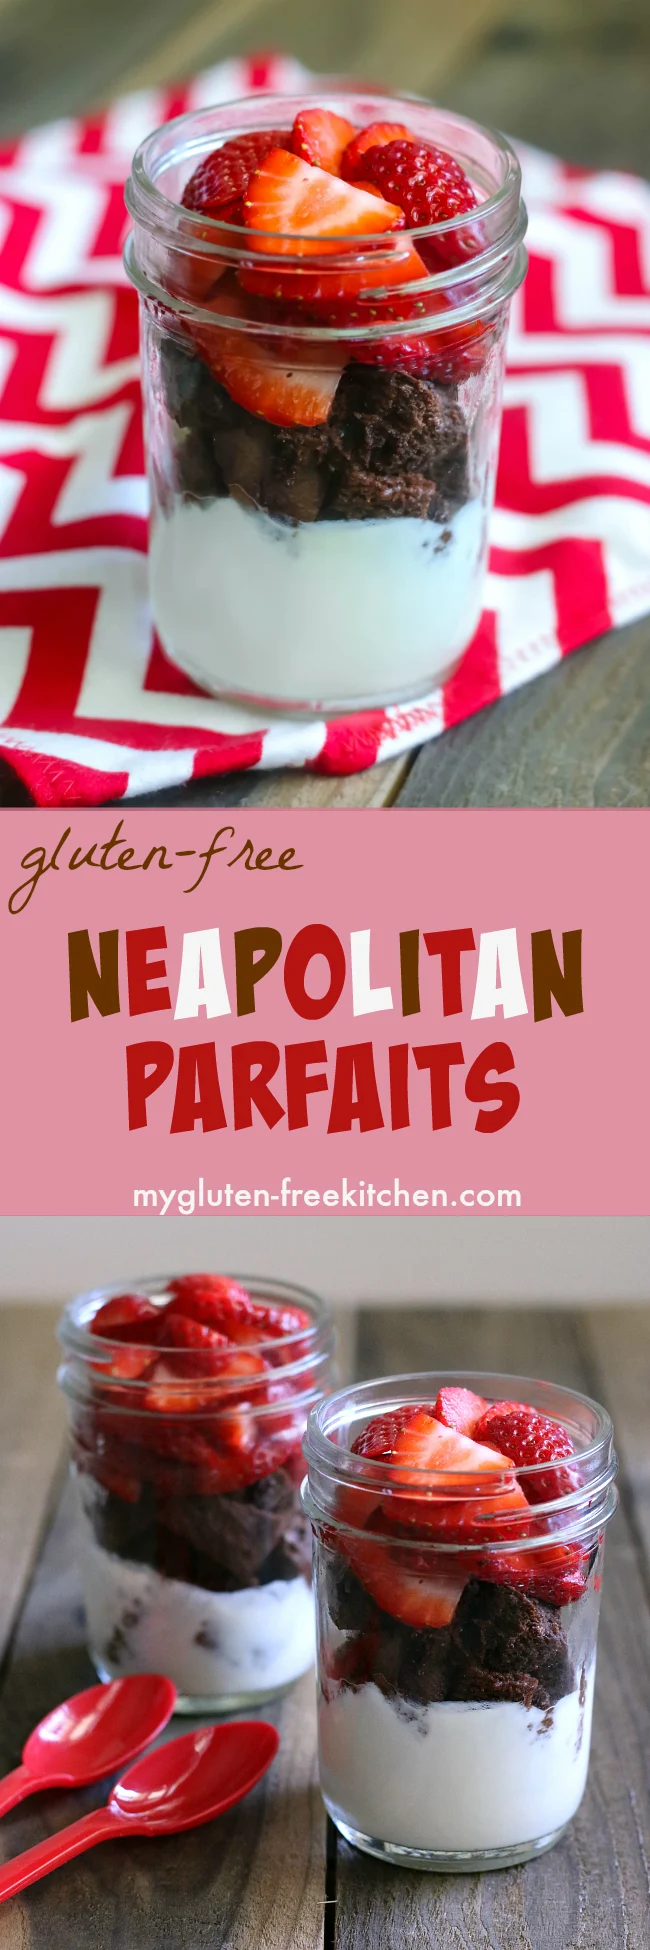 Neapolitan Parfaits. Yummy for breakfast or mid-day snack! Gluten-free, soy-free, nut-free recipe. Can easily adapt for dairy-free too!